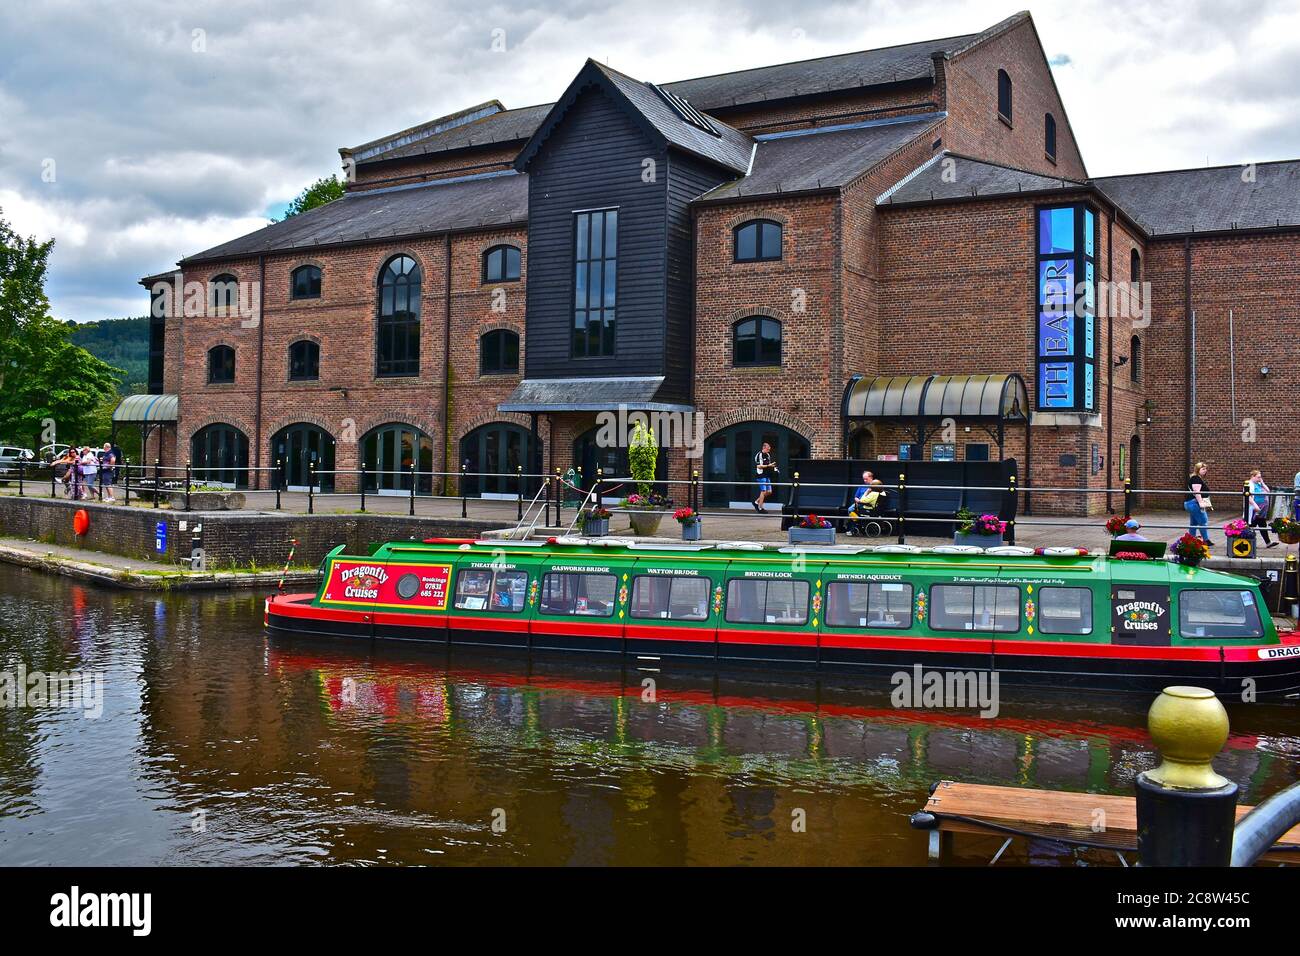 A street view of Theatr Bryncheiniog, located on the side of the central canal basin in Brecon town centre. Canal cruise boat at moorings Stock Photo